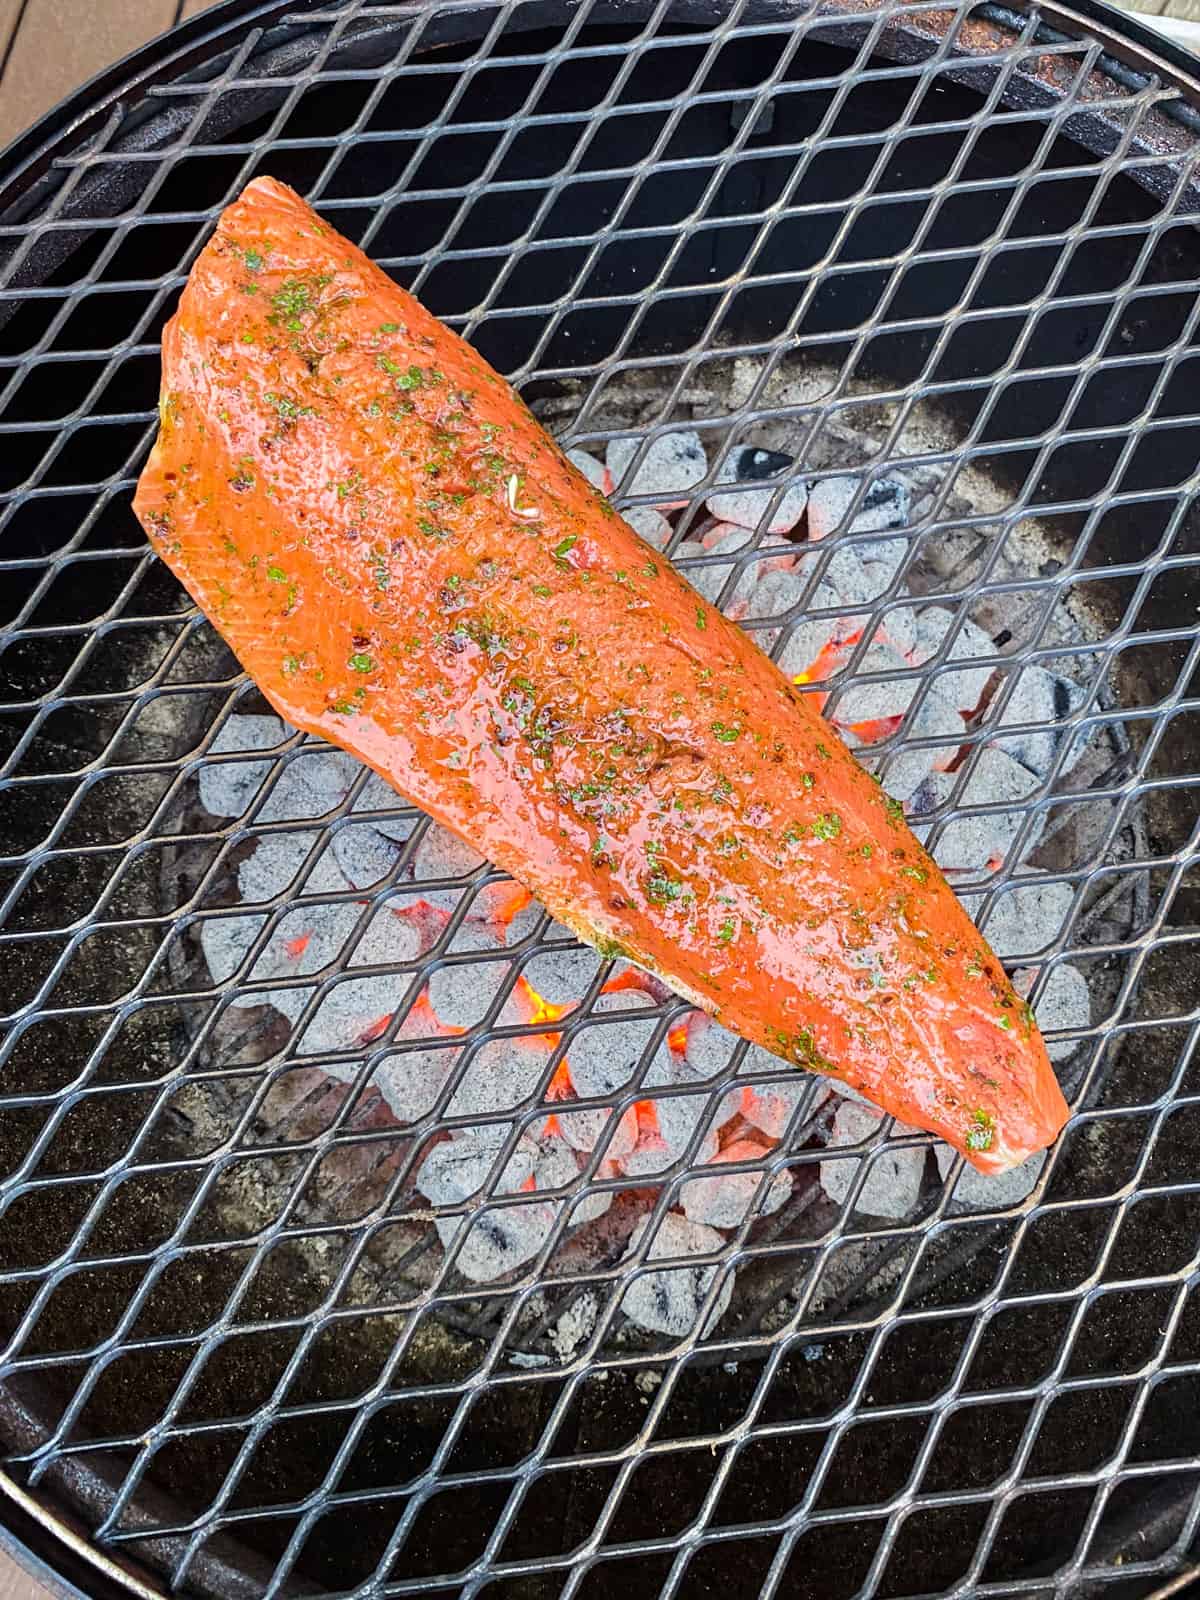 Place the sockeye salmon filet on the hot grill.